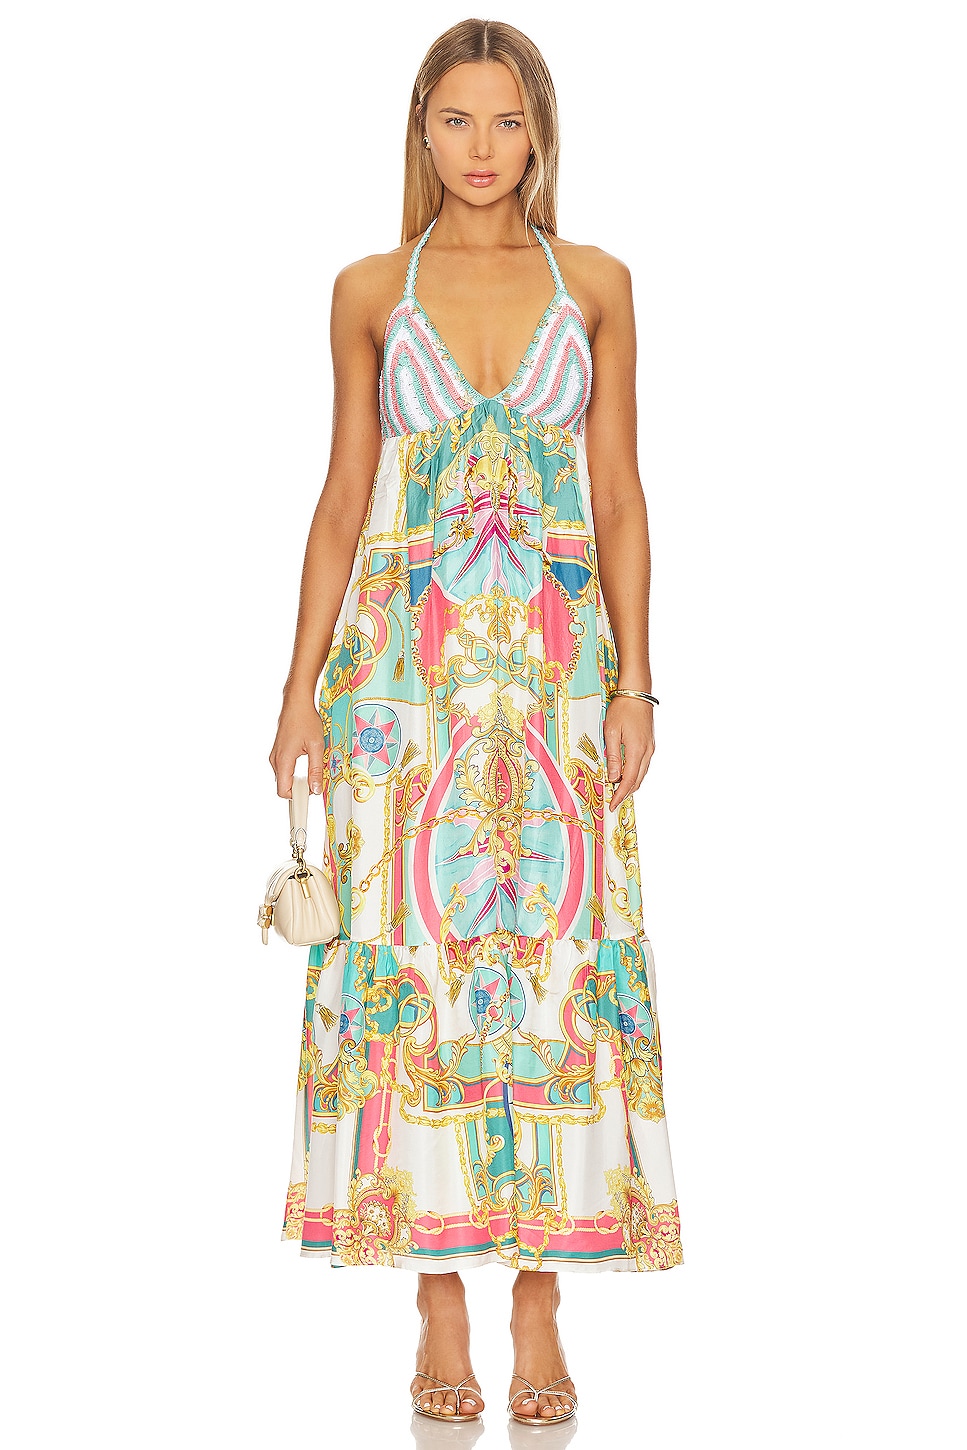 Camilla Maxi Dress in Sail Away With Me